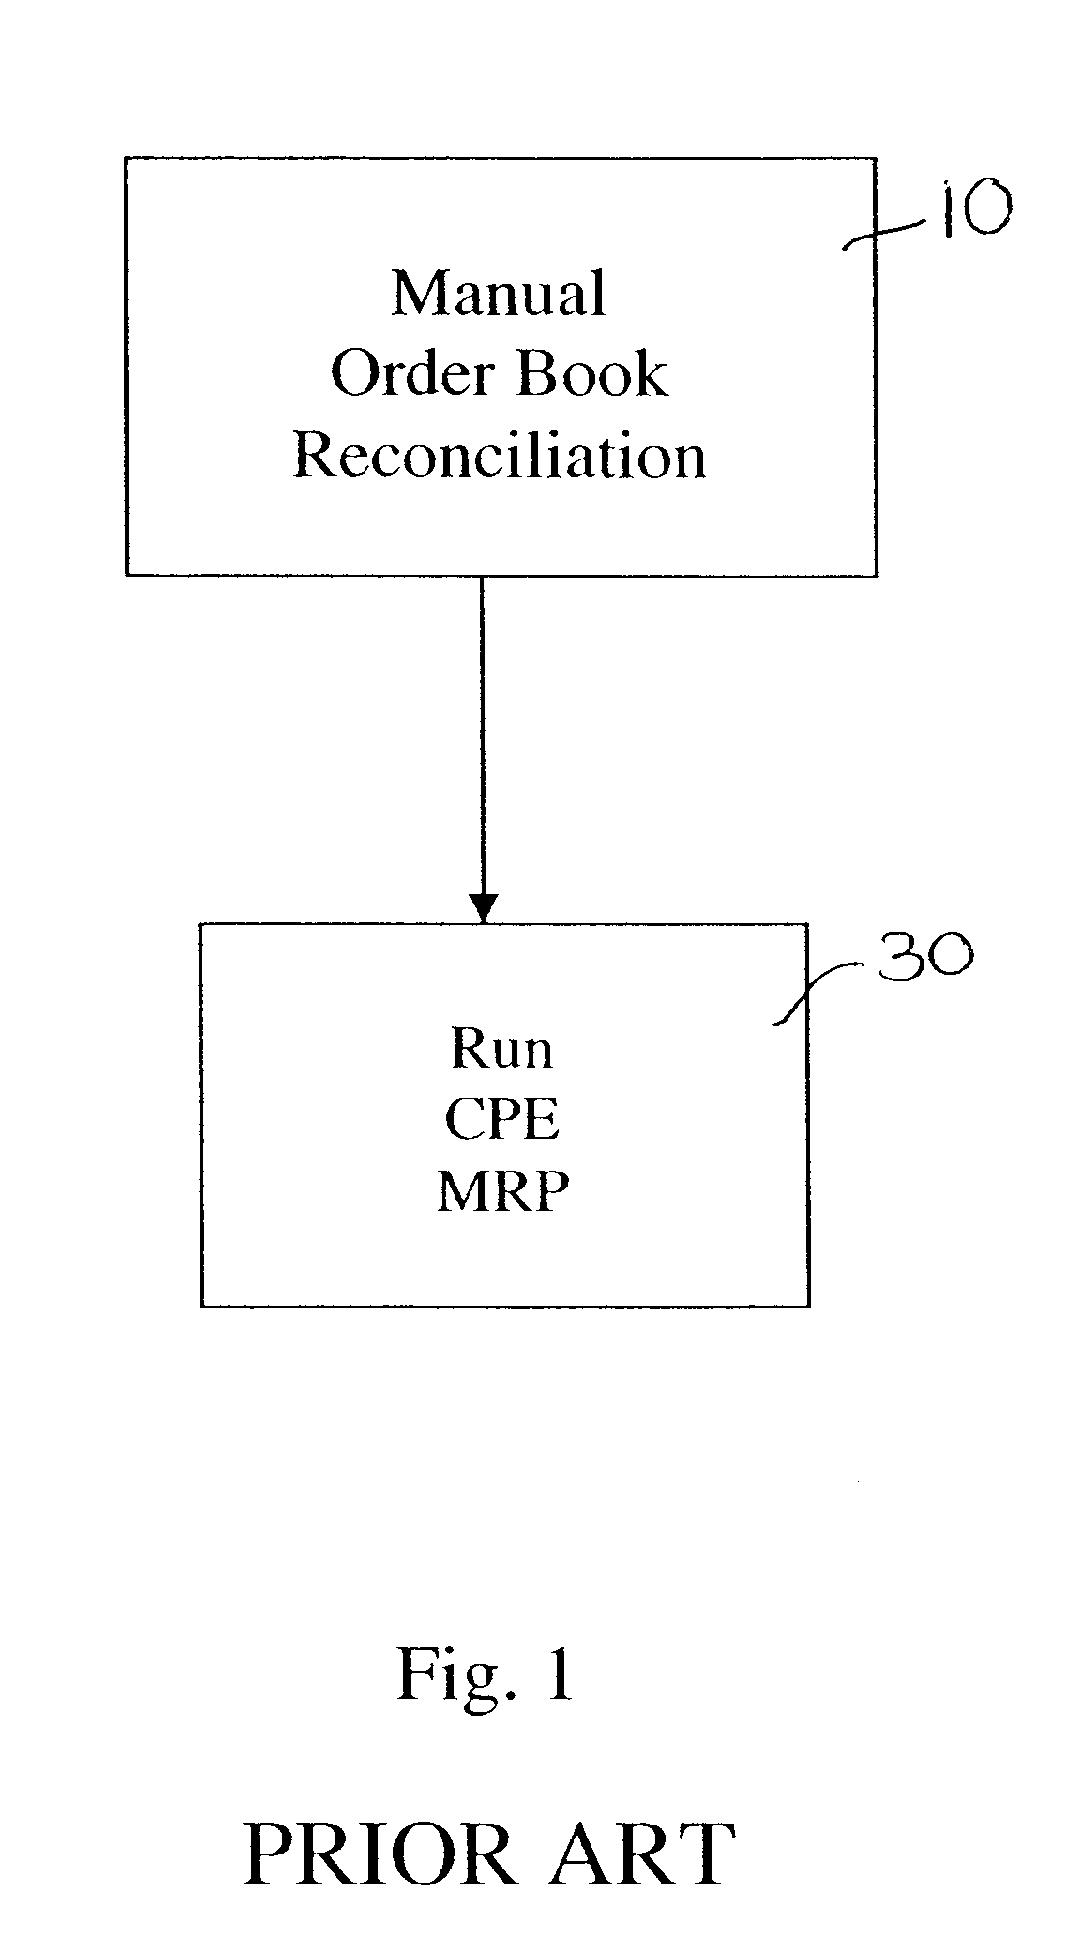 Automated order book reconciliation process